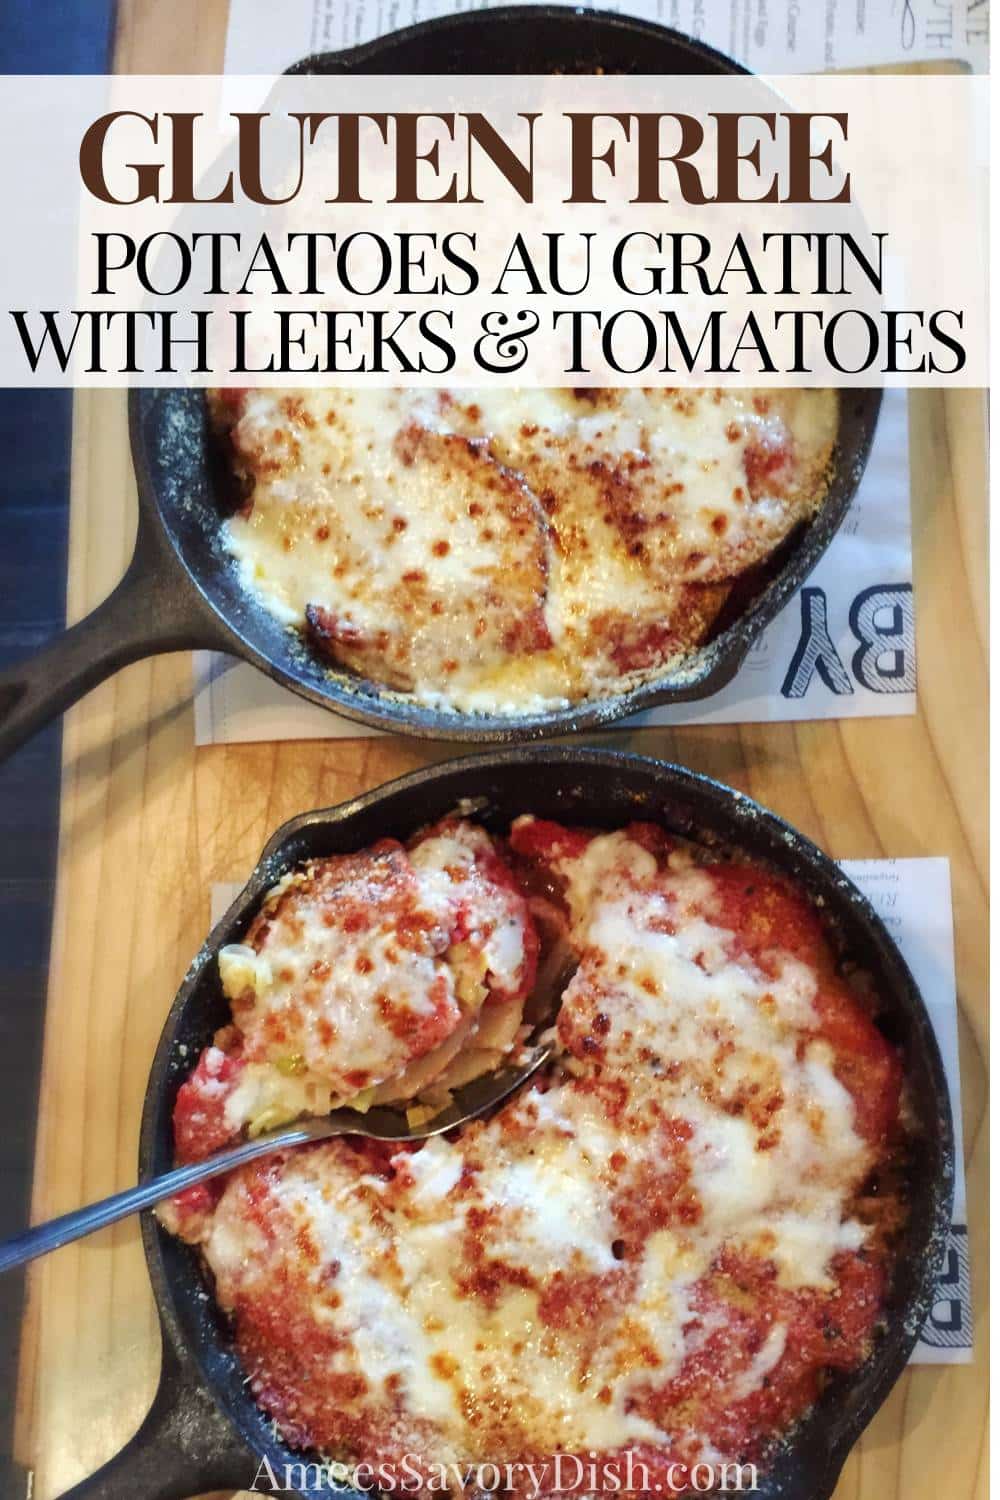 A mouthwatering recipe for gluten-free Potatoes Au Gratin made with Yukon gold potatoes, fresh herbs, butter, cream, leeks, tomatoes, and Parmigiano-Reggiano cheese created by Chef Hugh Acheson. via @Ameessavorydish